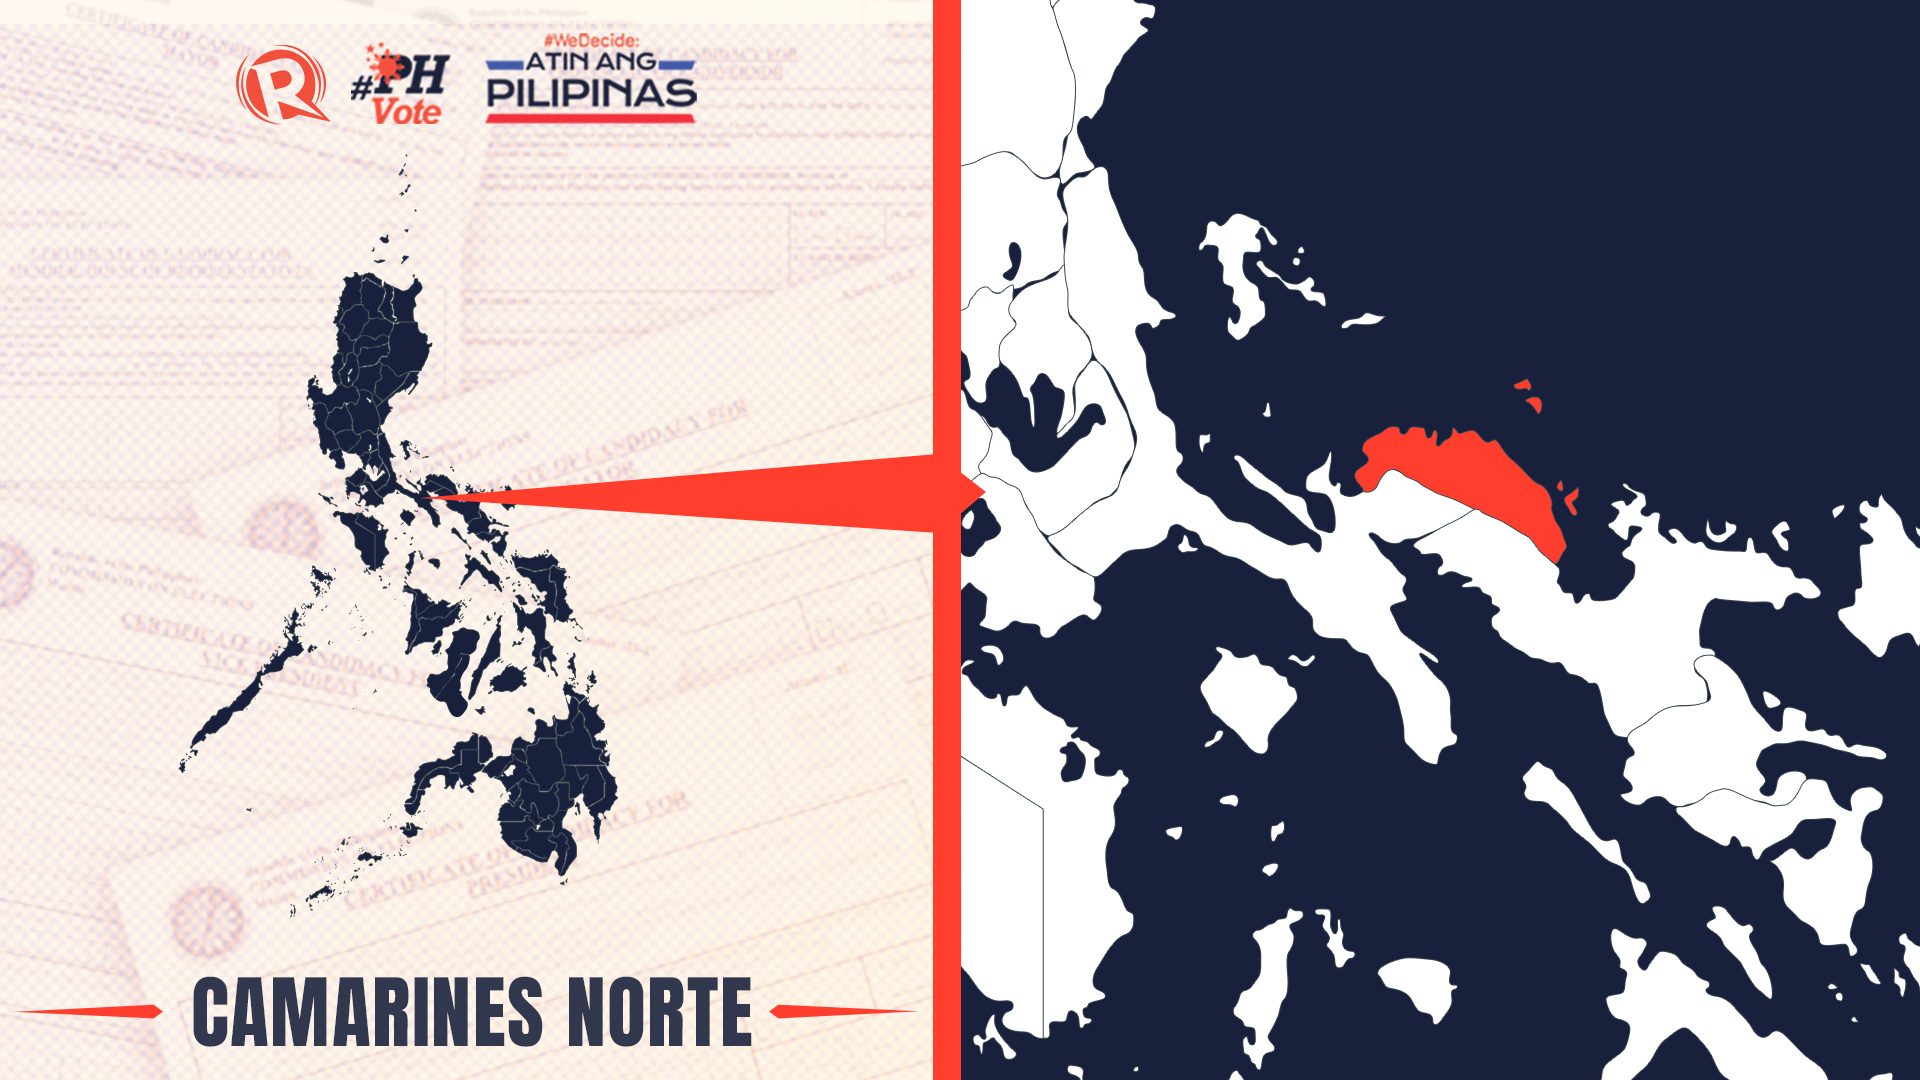 LIST: Who is running in Camarines Norte in the 2022 Philippine elections?